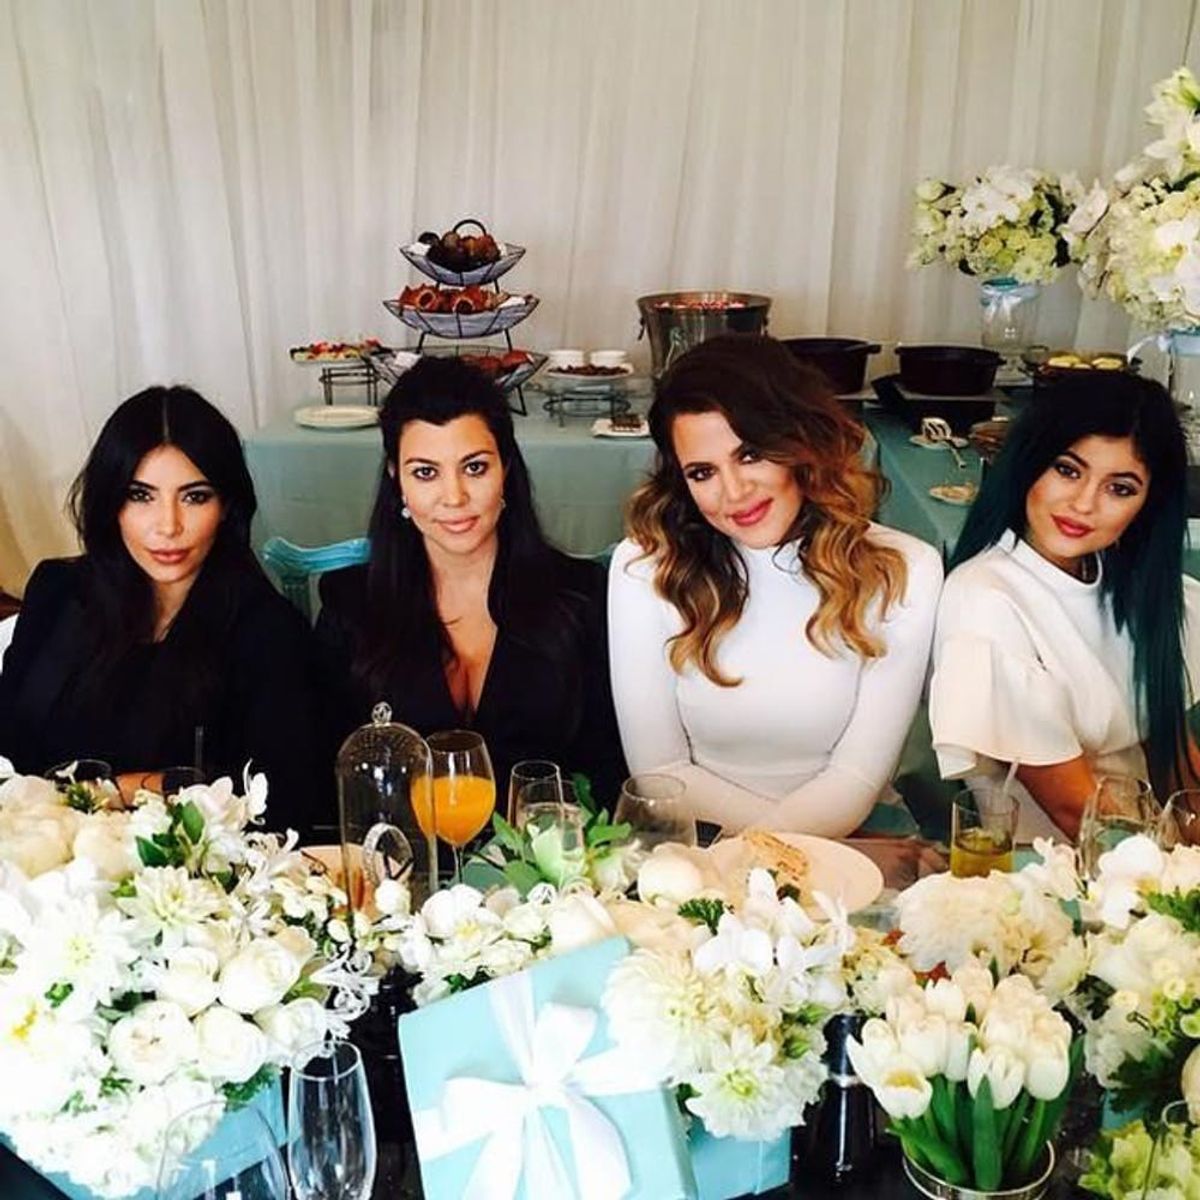 7 Celebrity Baby Shower Ideas You Should Totally Steal